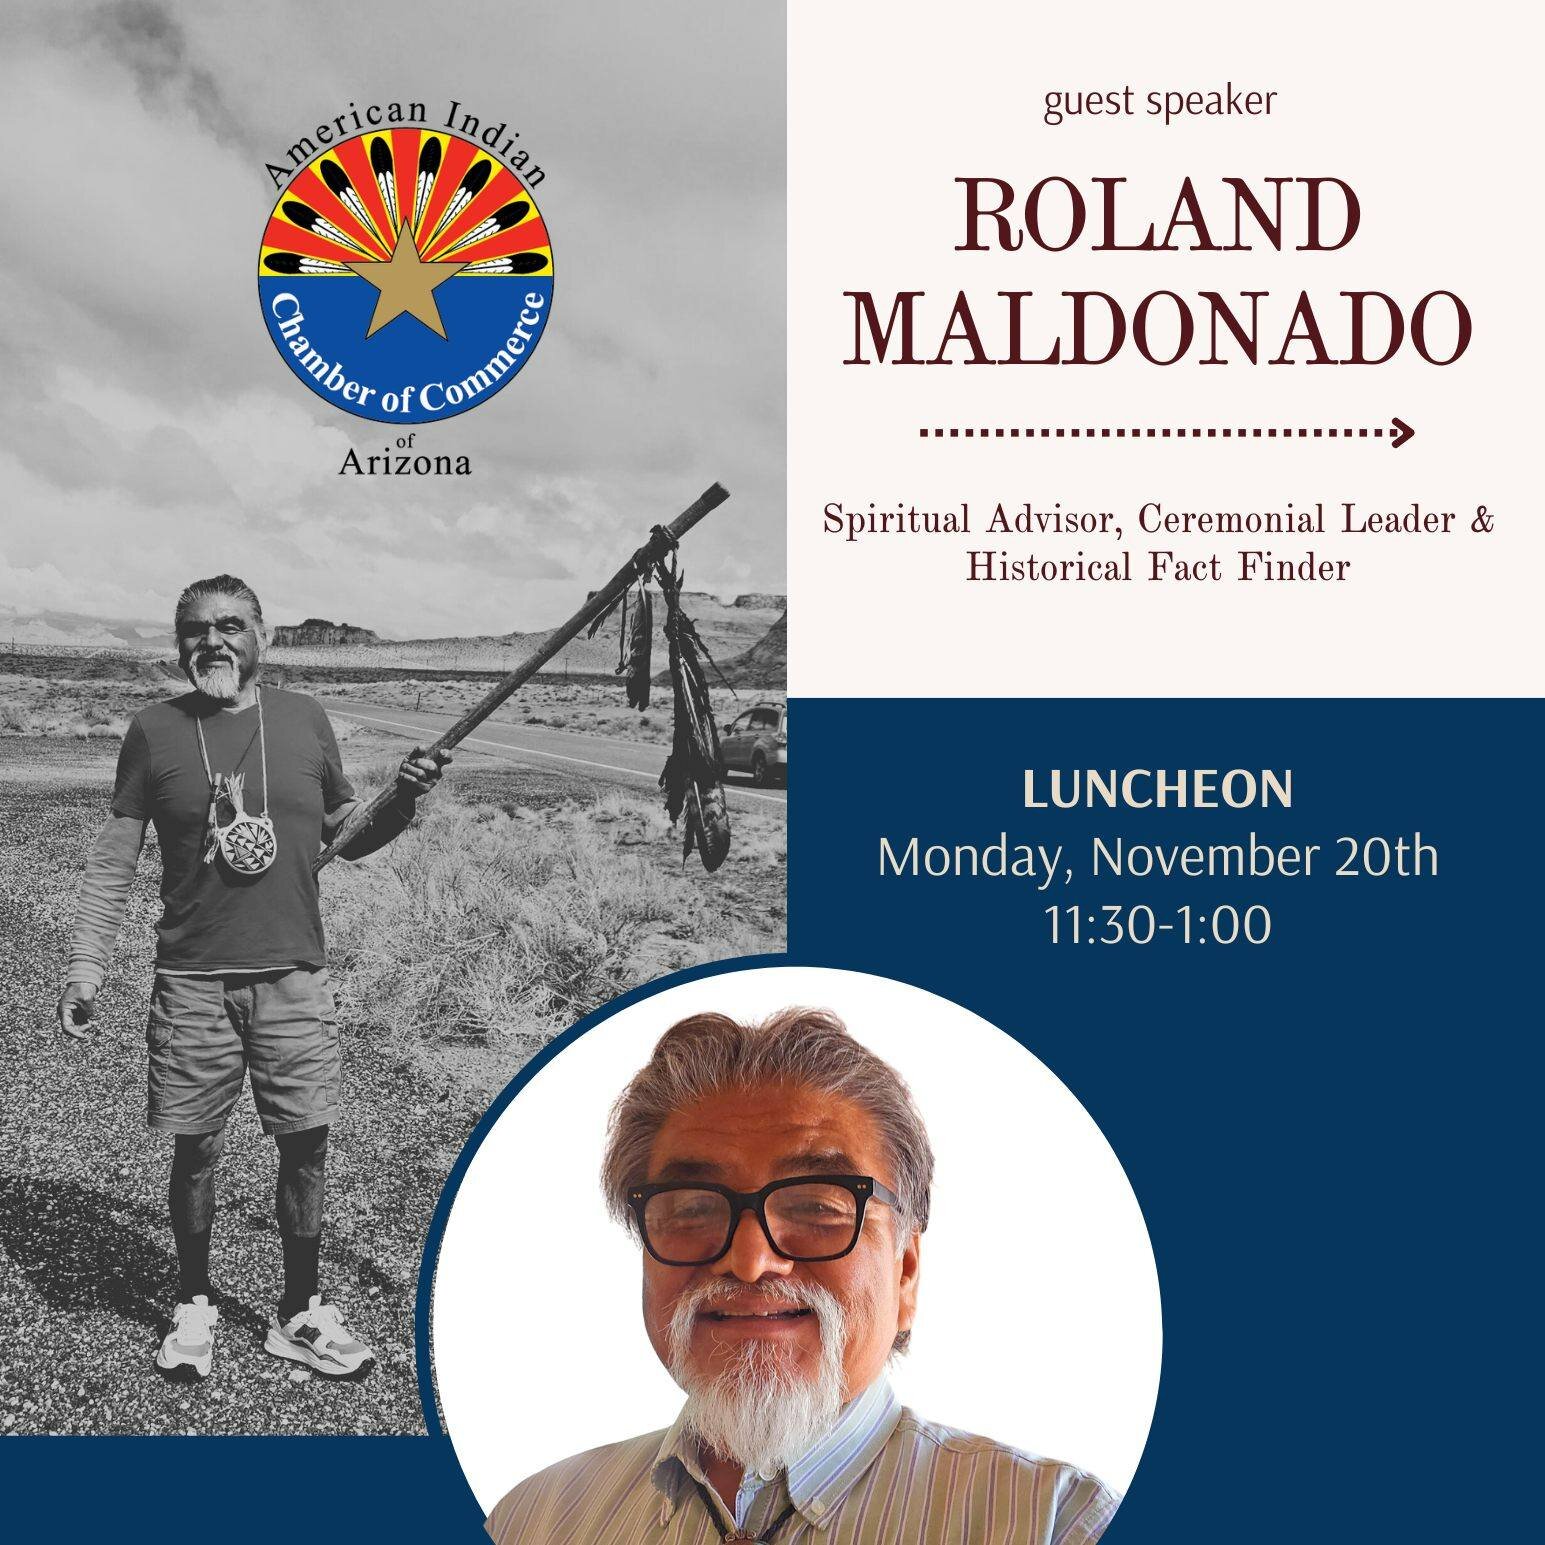 We hope to see you on Monday!

Take advantage of this opportunity to listen and learn from a Spiritual Advisor, Ceremonial Leader, and Historical Fact Finder of the Kaibab Paiute Tribe.

Hope to see you there!

Register here: https://www.aiccaz.com/e